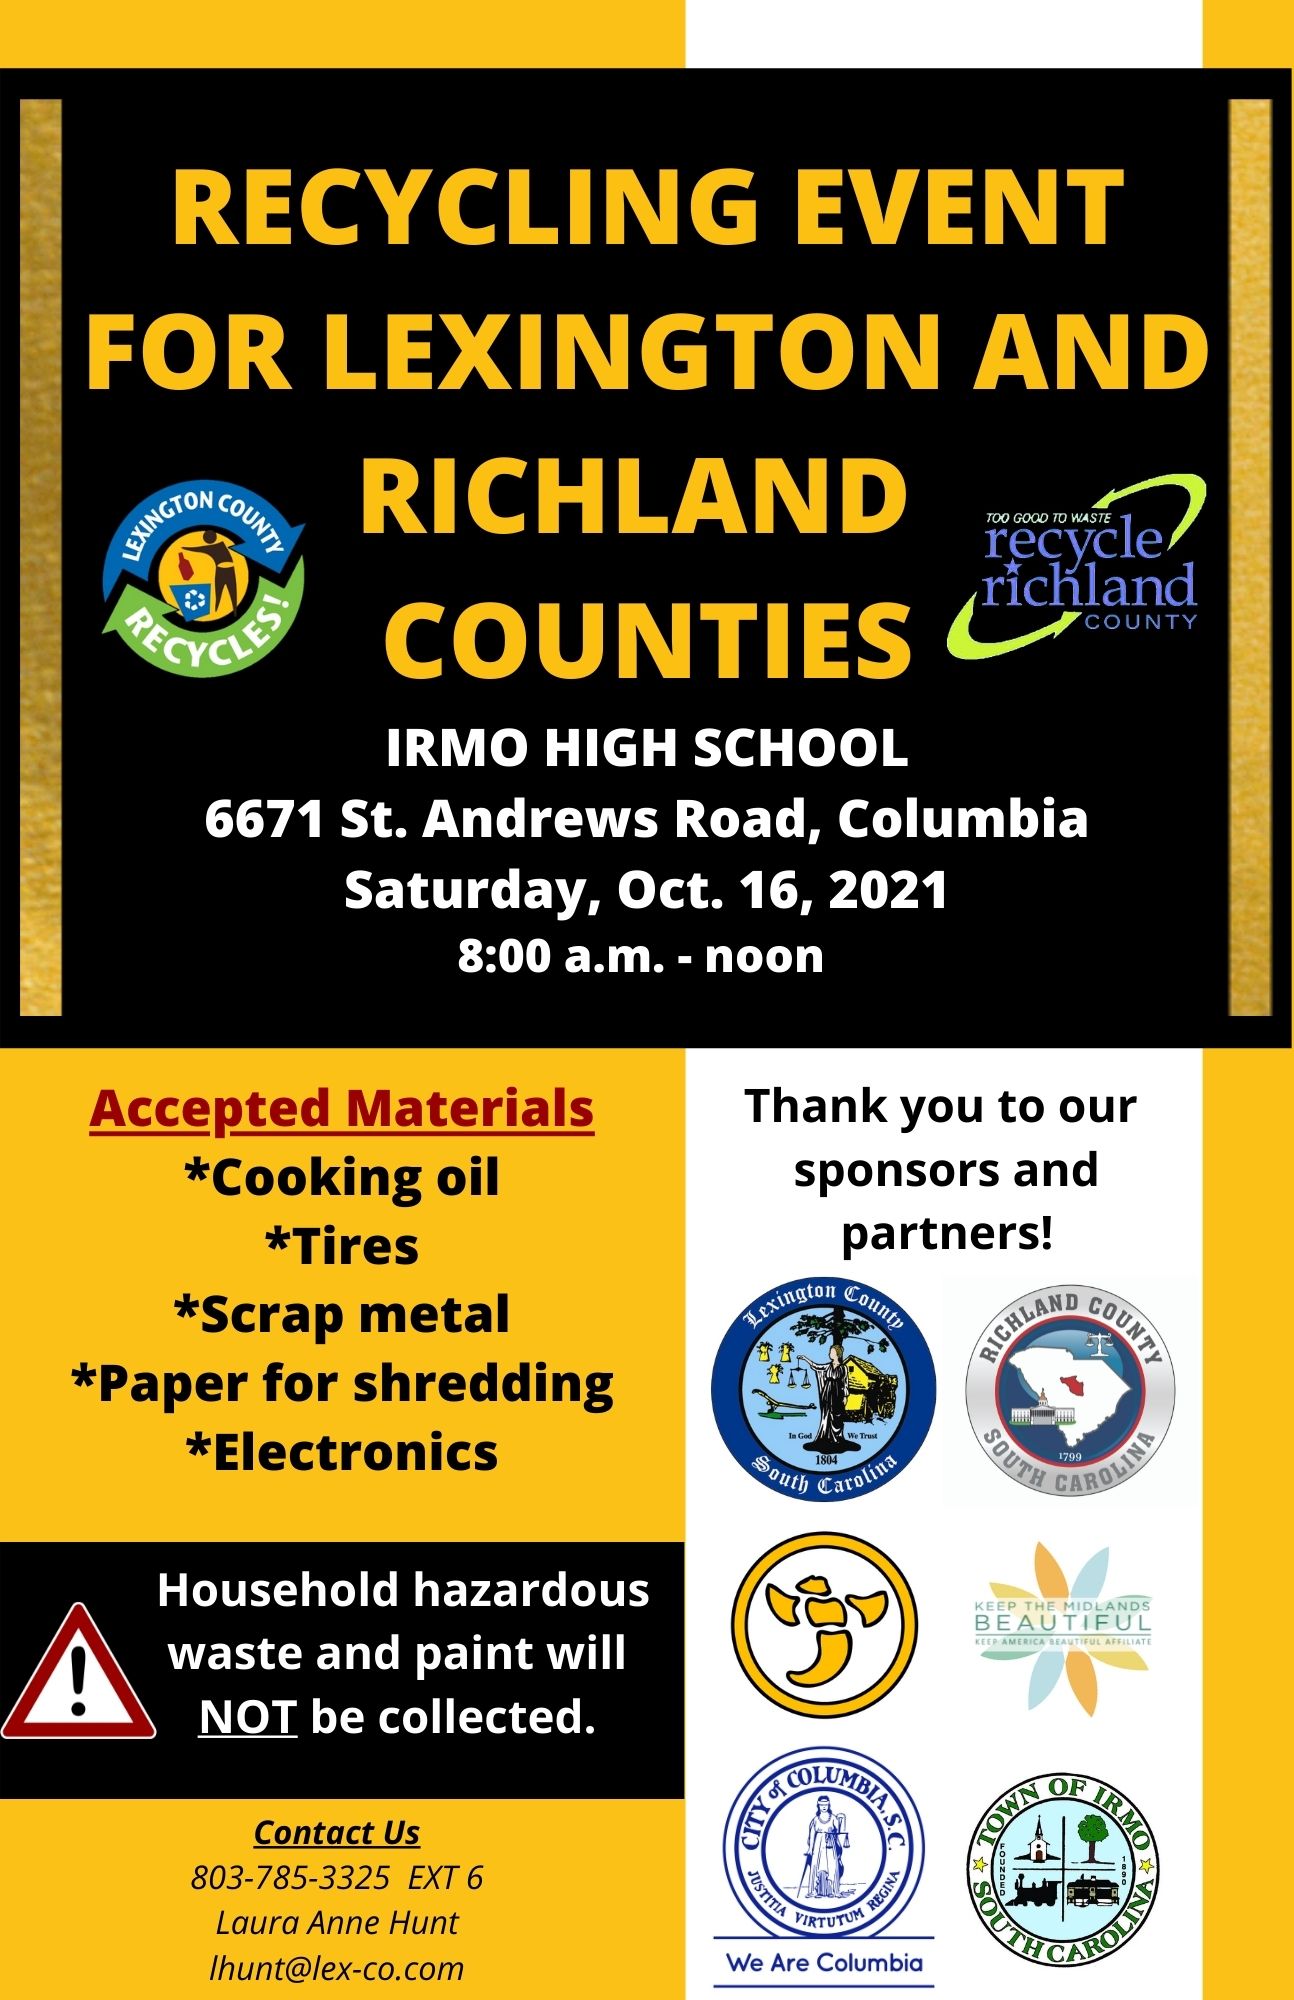 Recycling Dropoff Event for Lexington and Richland Counties October 16